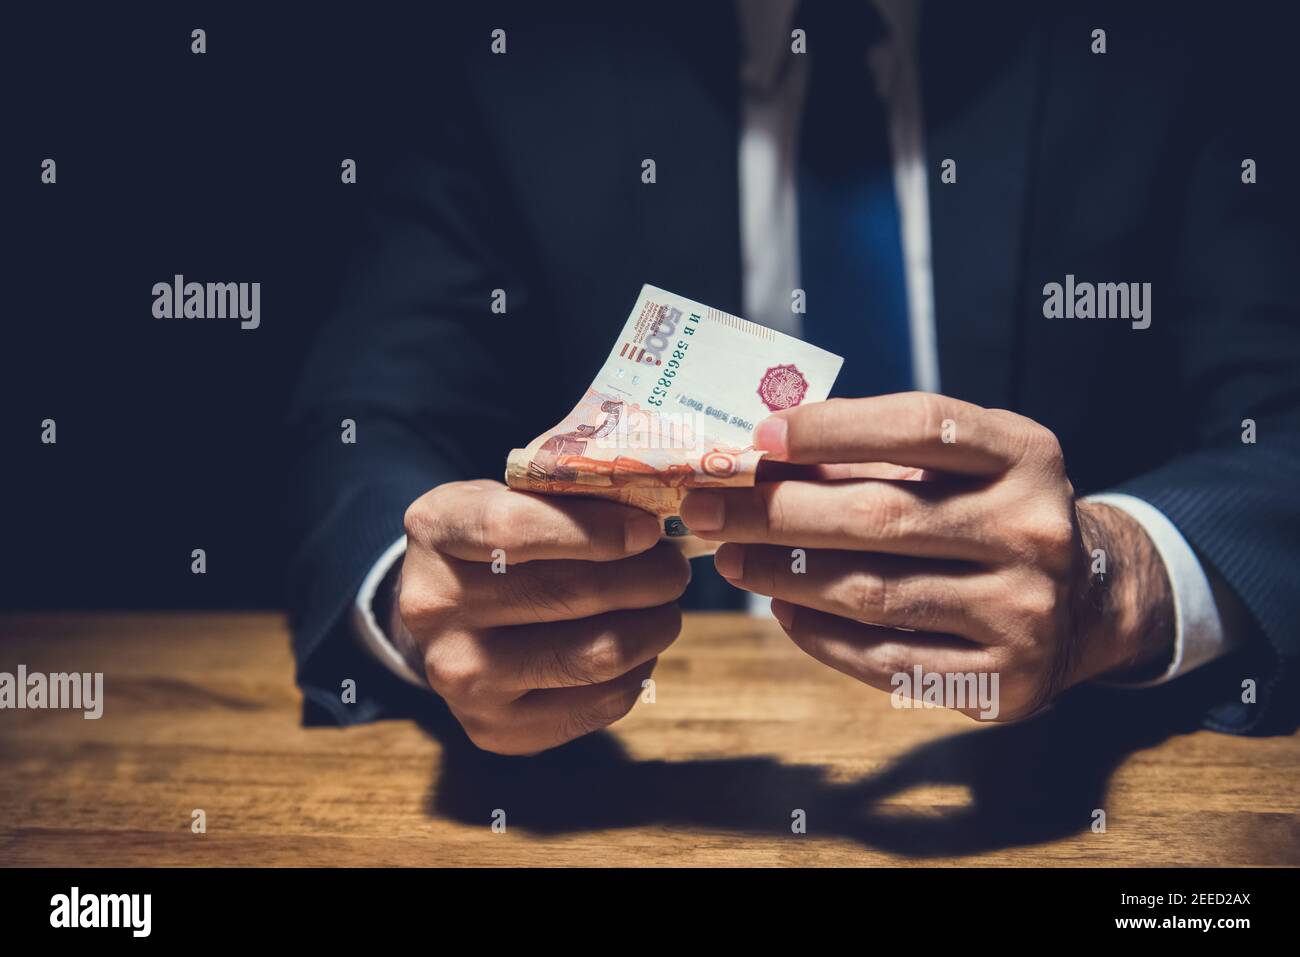 Businessman counting money,  Russian Ruble banknotes, on his desk in a dark office - corruption and bribery concept Stock Photo